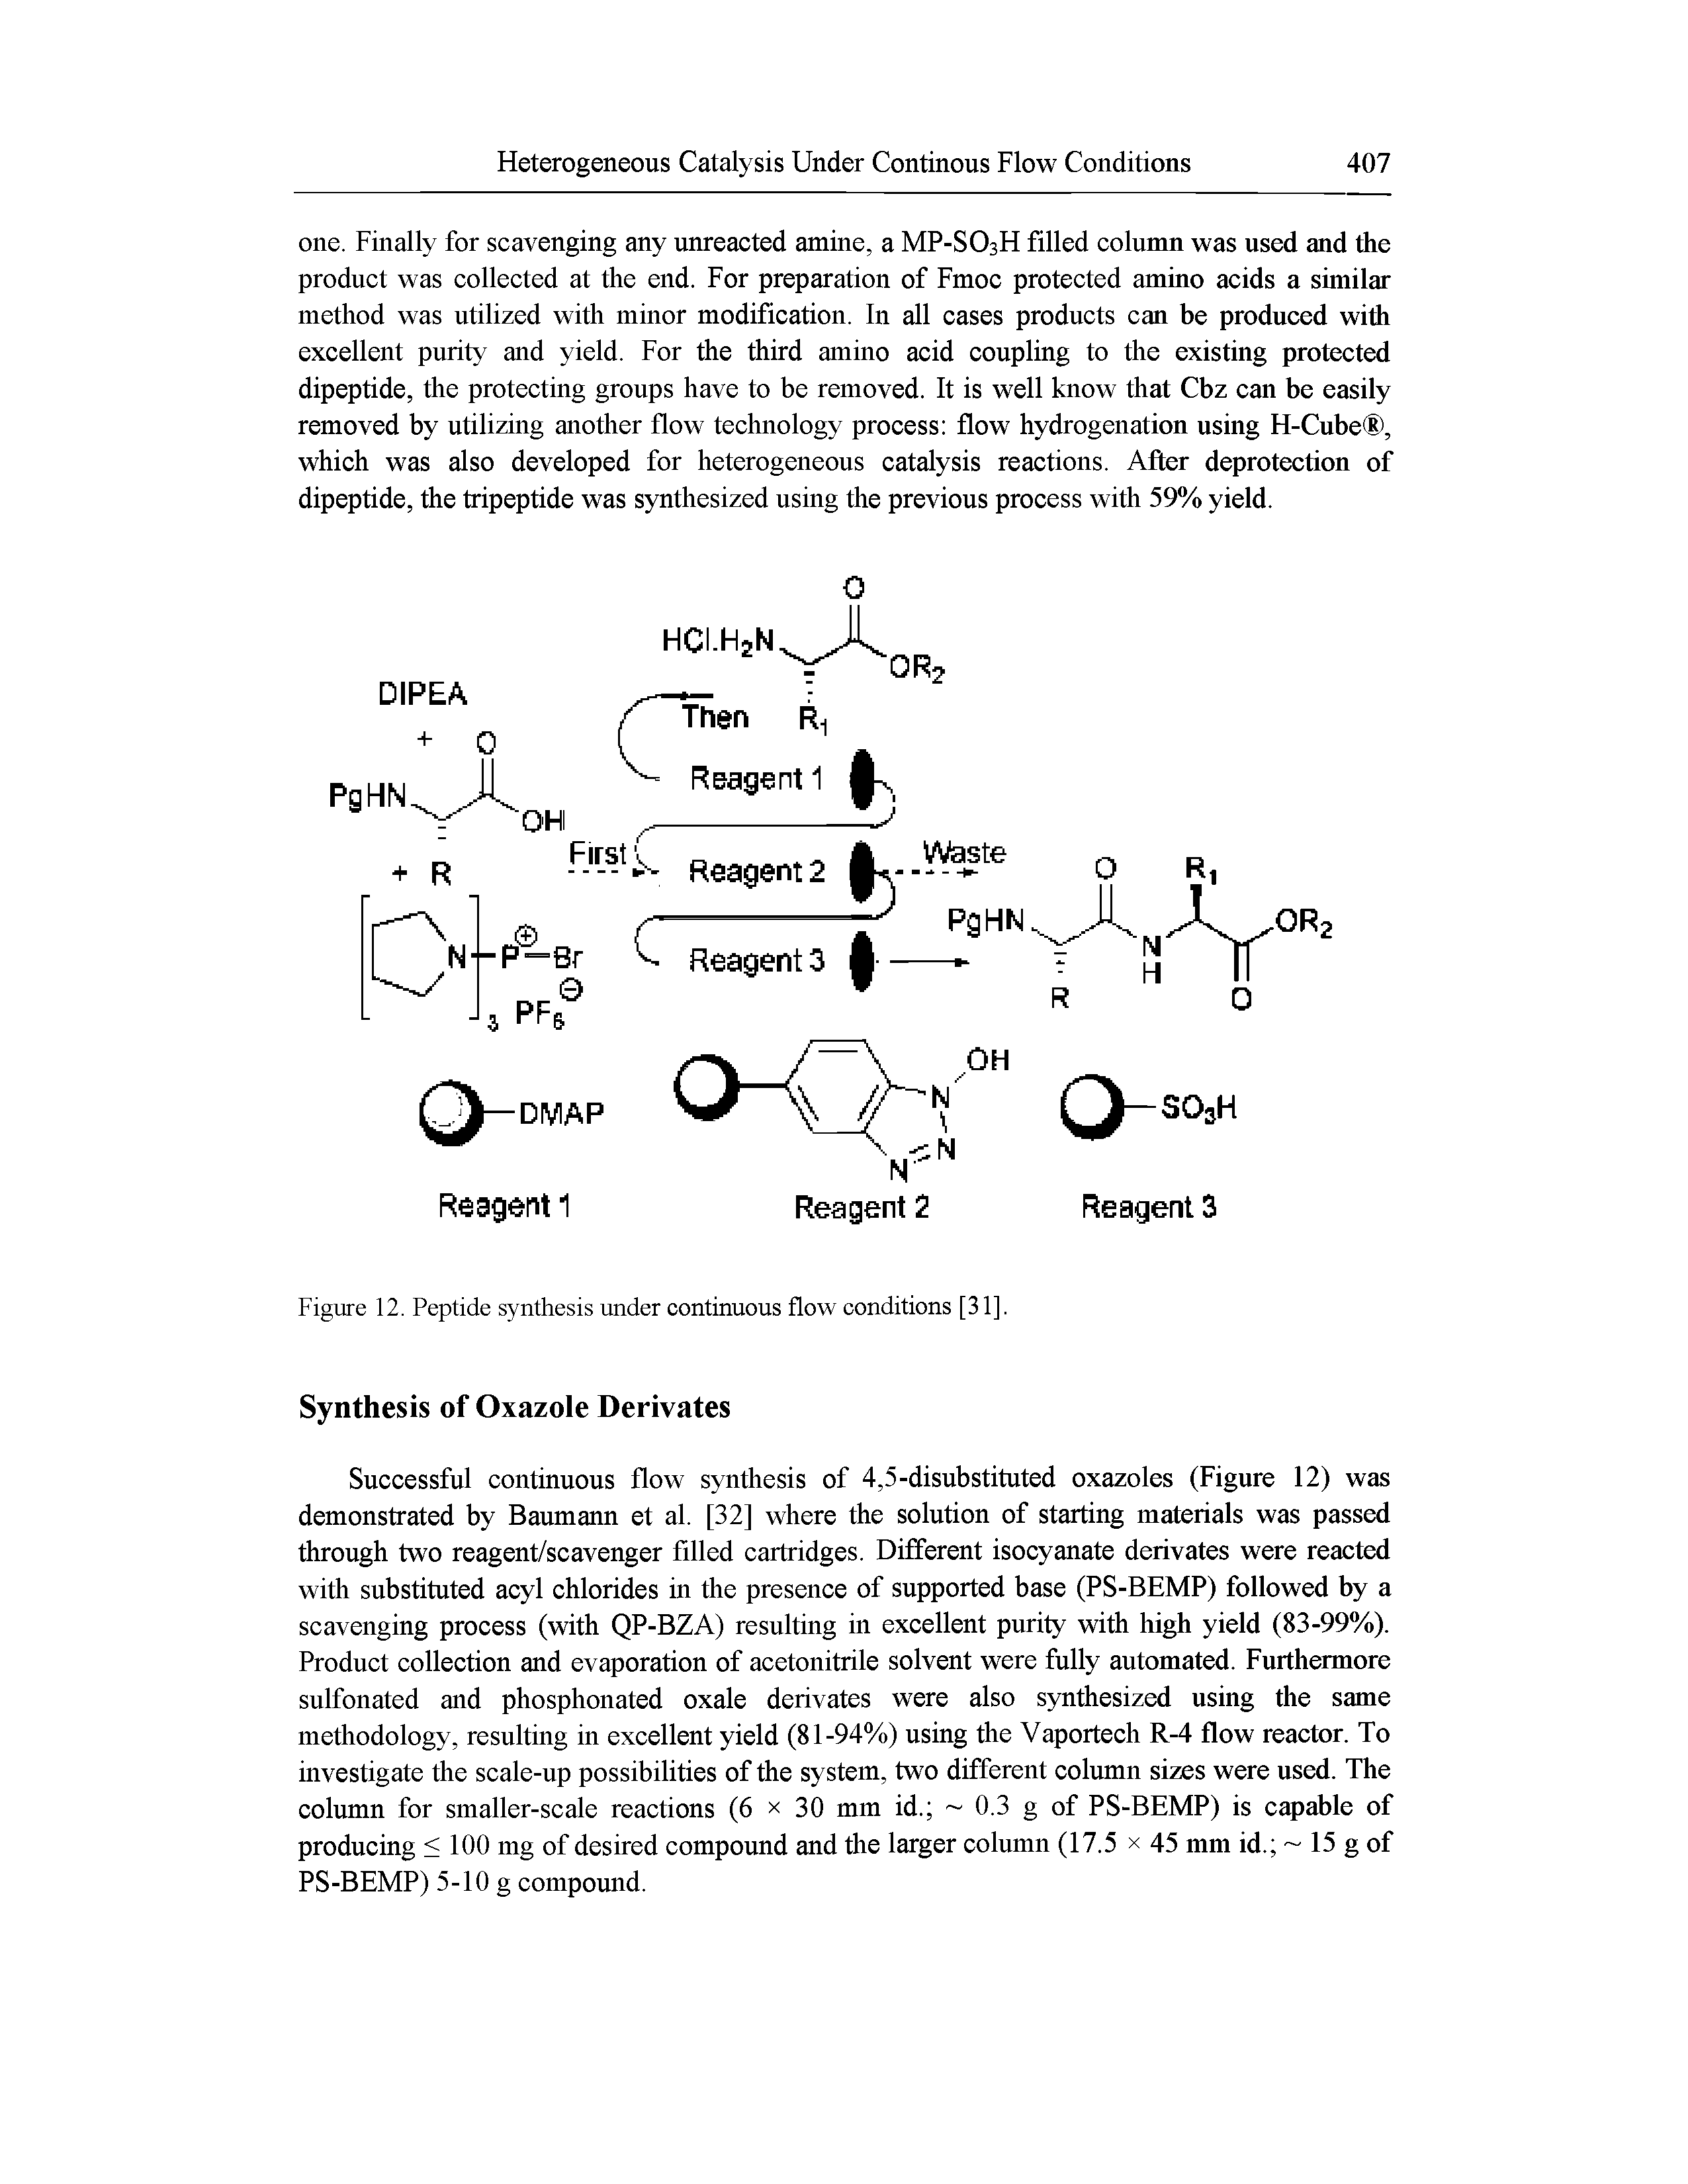 Figure 12. Peptide synthesis under continuous flow conditions [31].